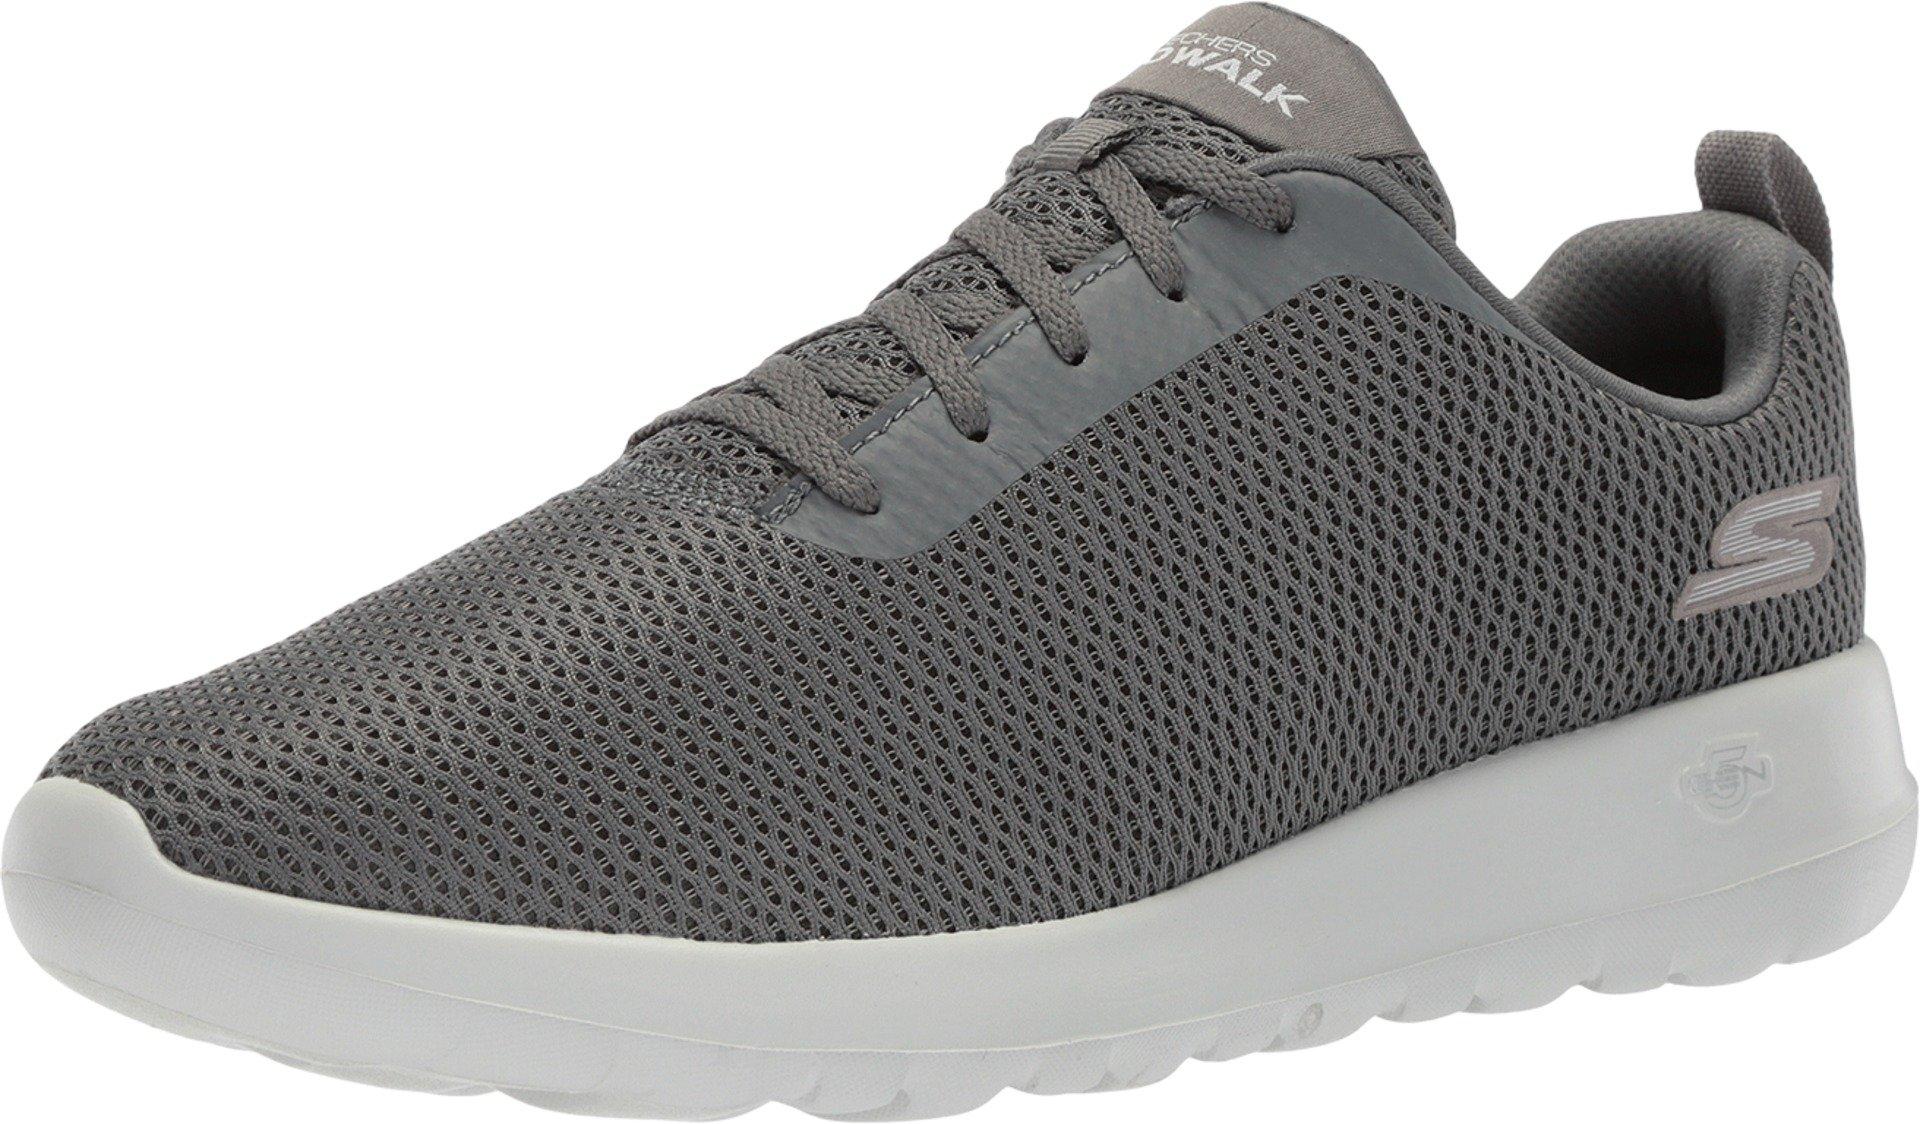 Skechers Synthetic Go Walk Max - 54601 in Charcoal (Gray) for Men - Lyst